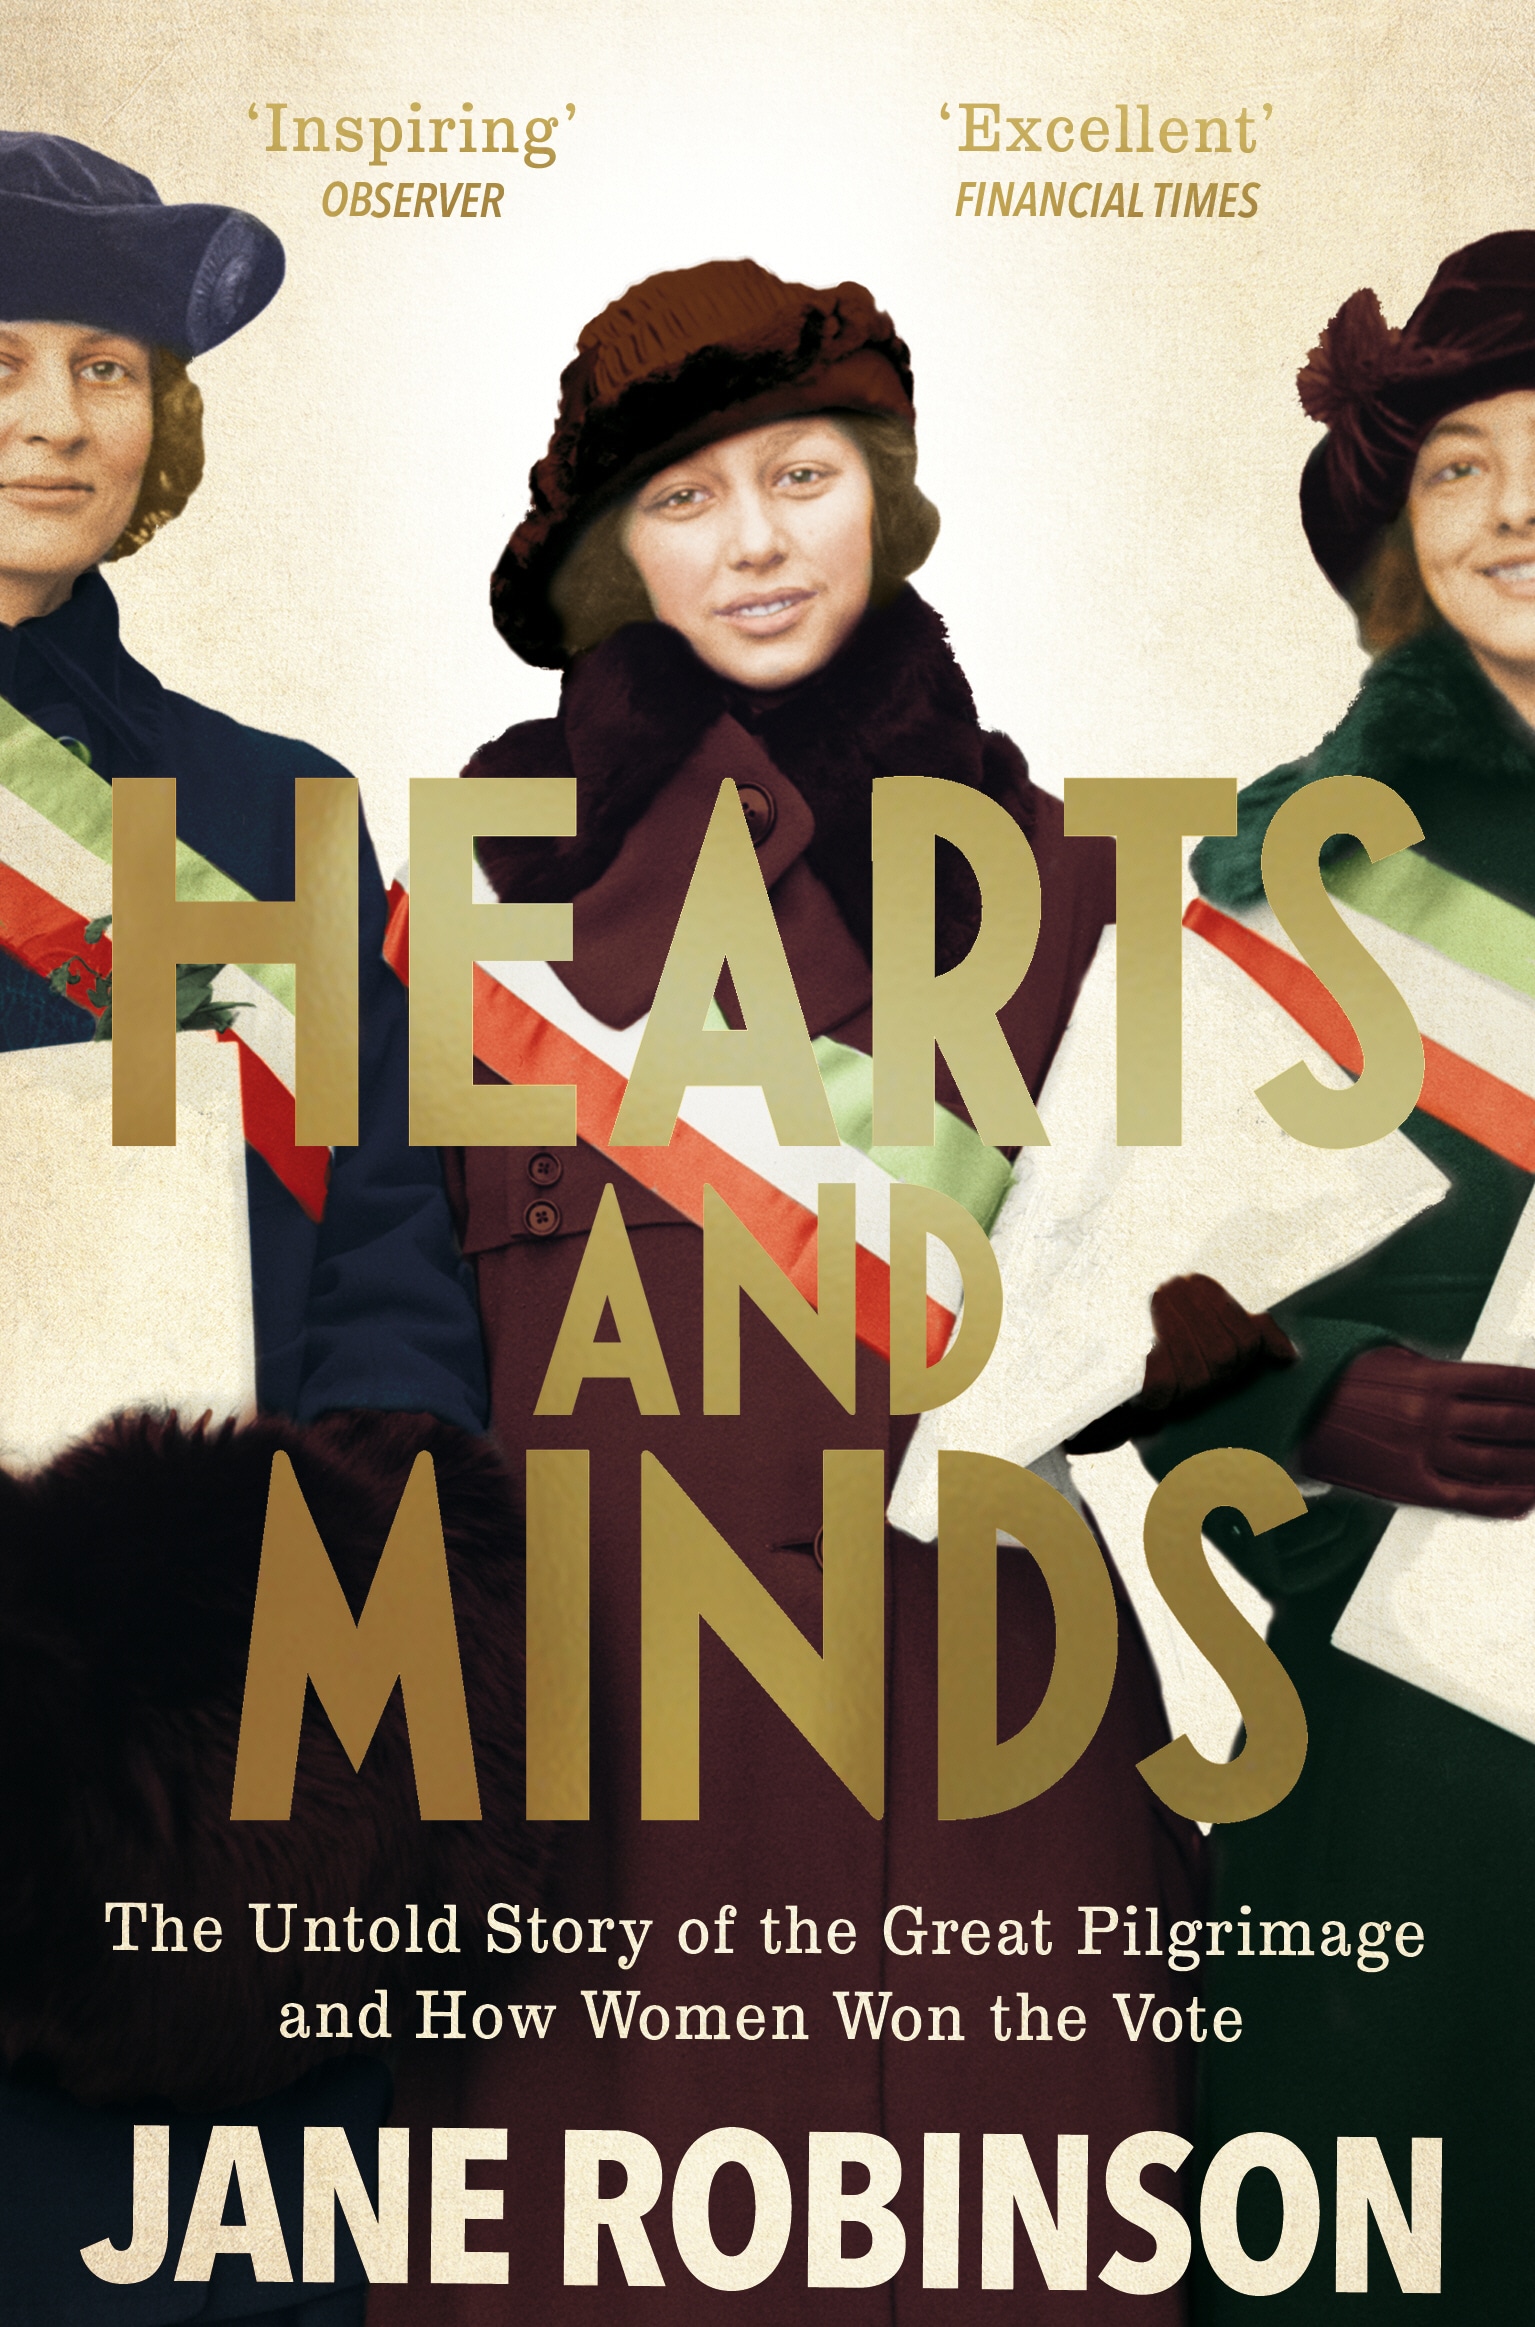 Book “Hearts And Minds” by Jane Robinson — January 10, 2019